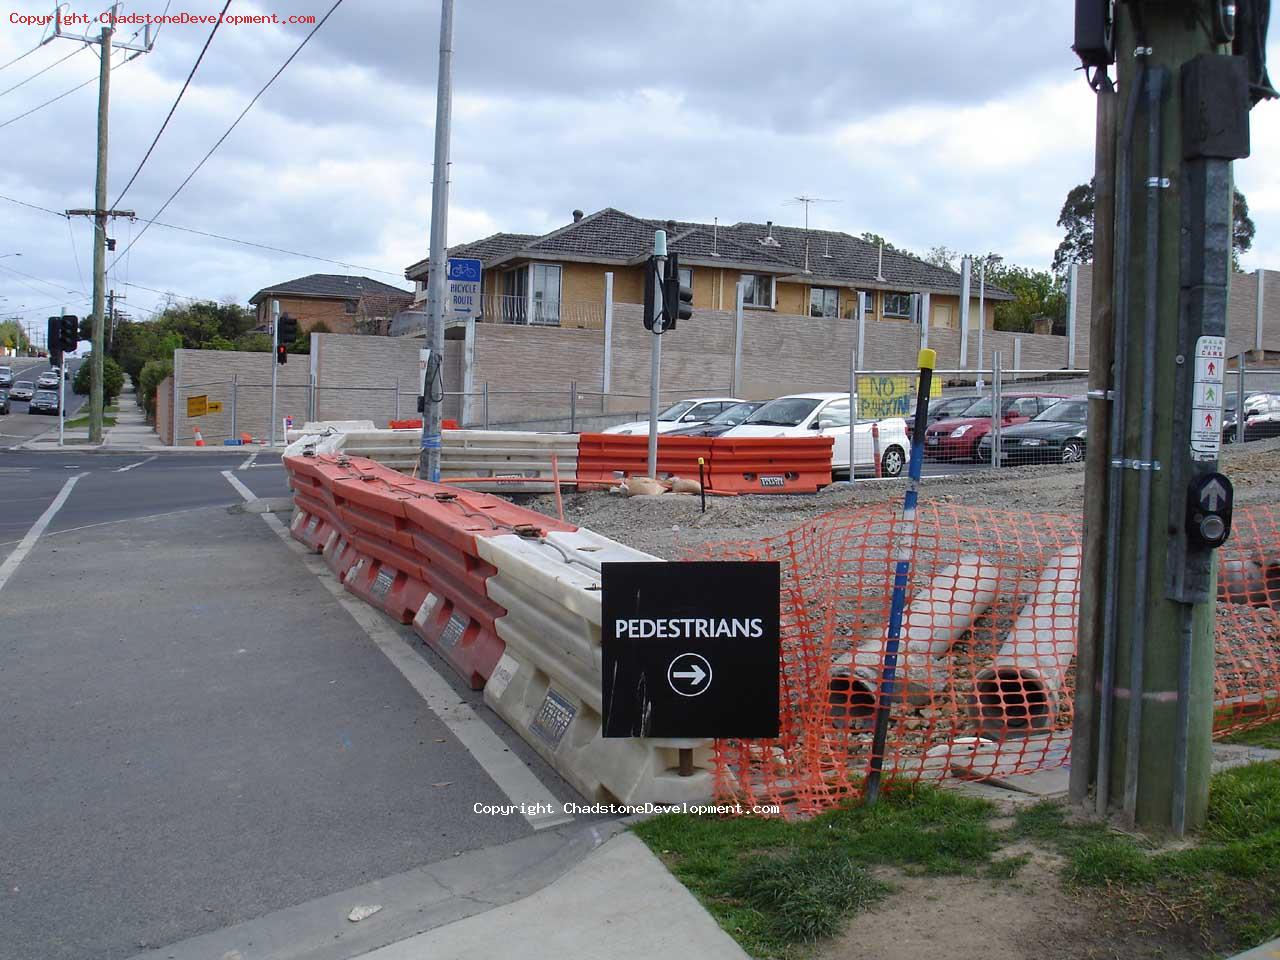 More pedestrian signage at Warrigal Rd - Chadstone Development Discussions